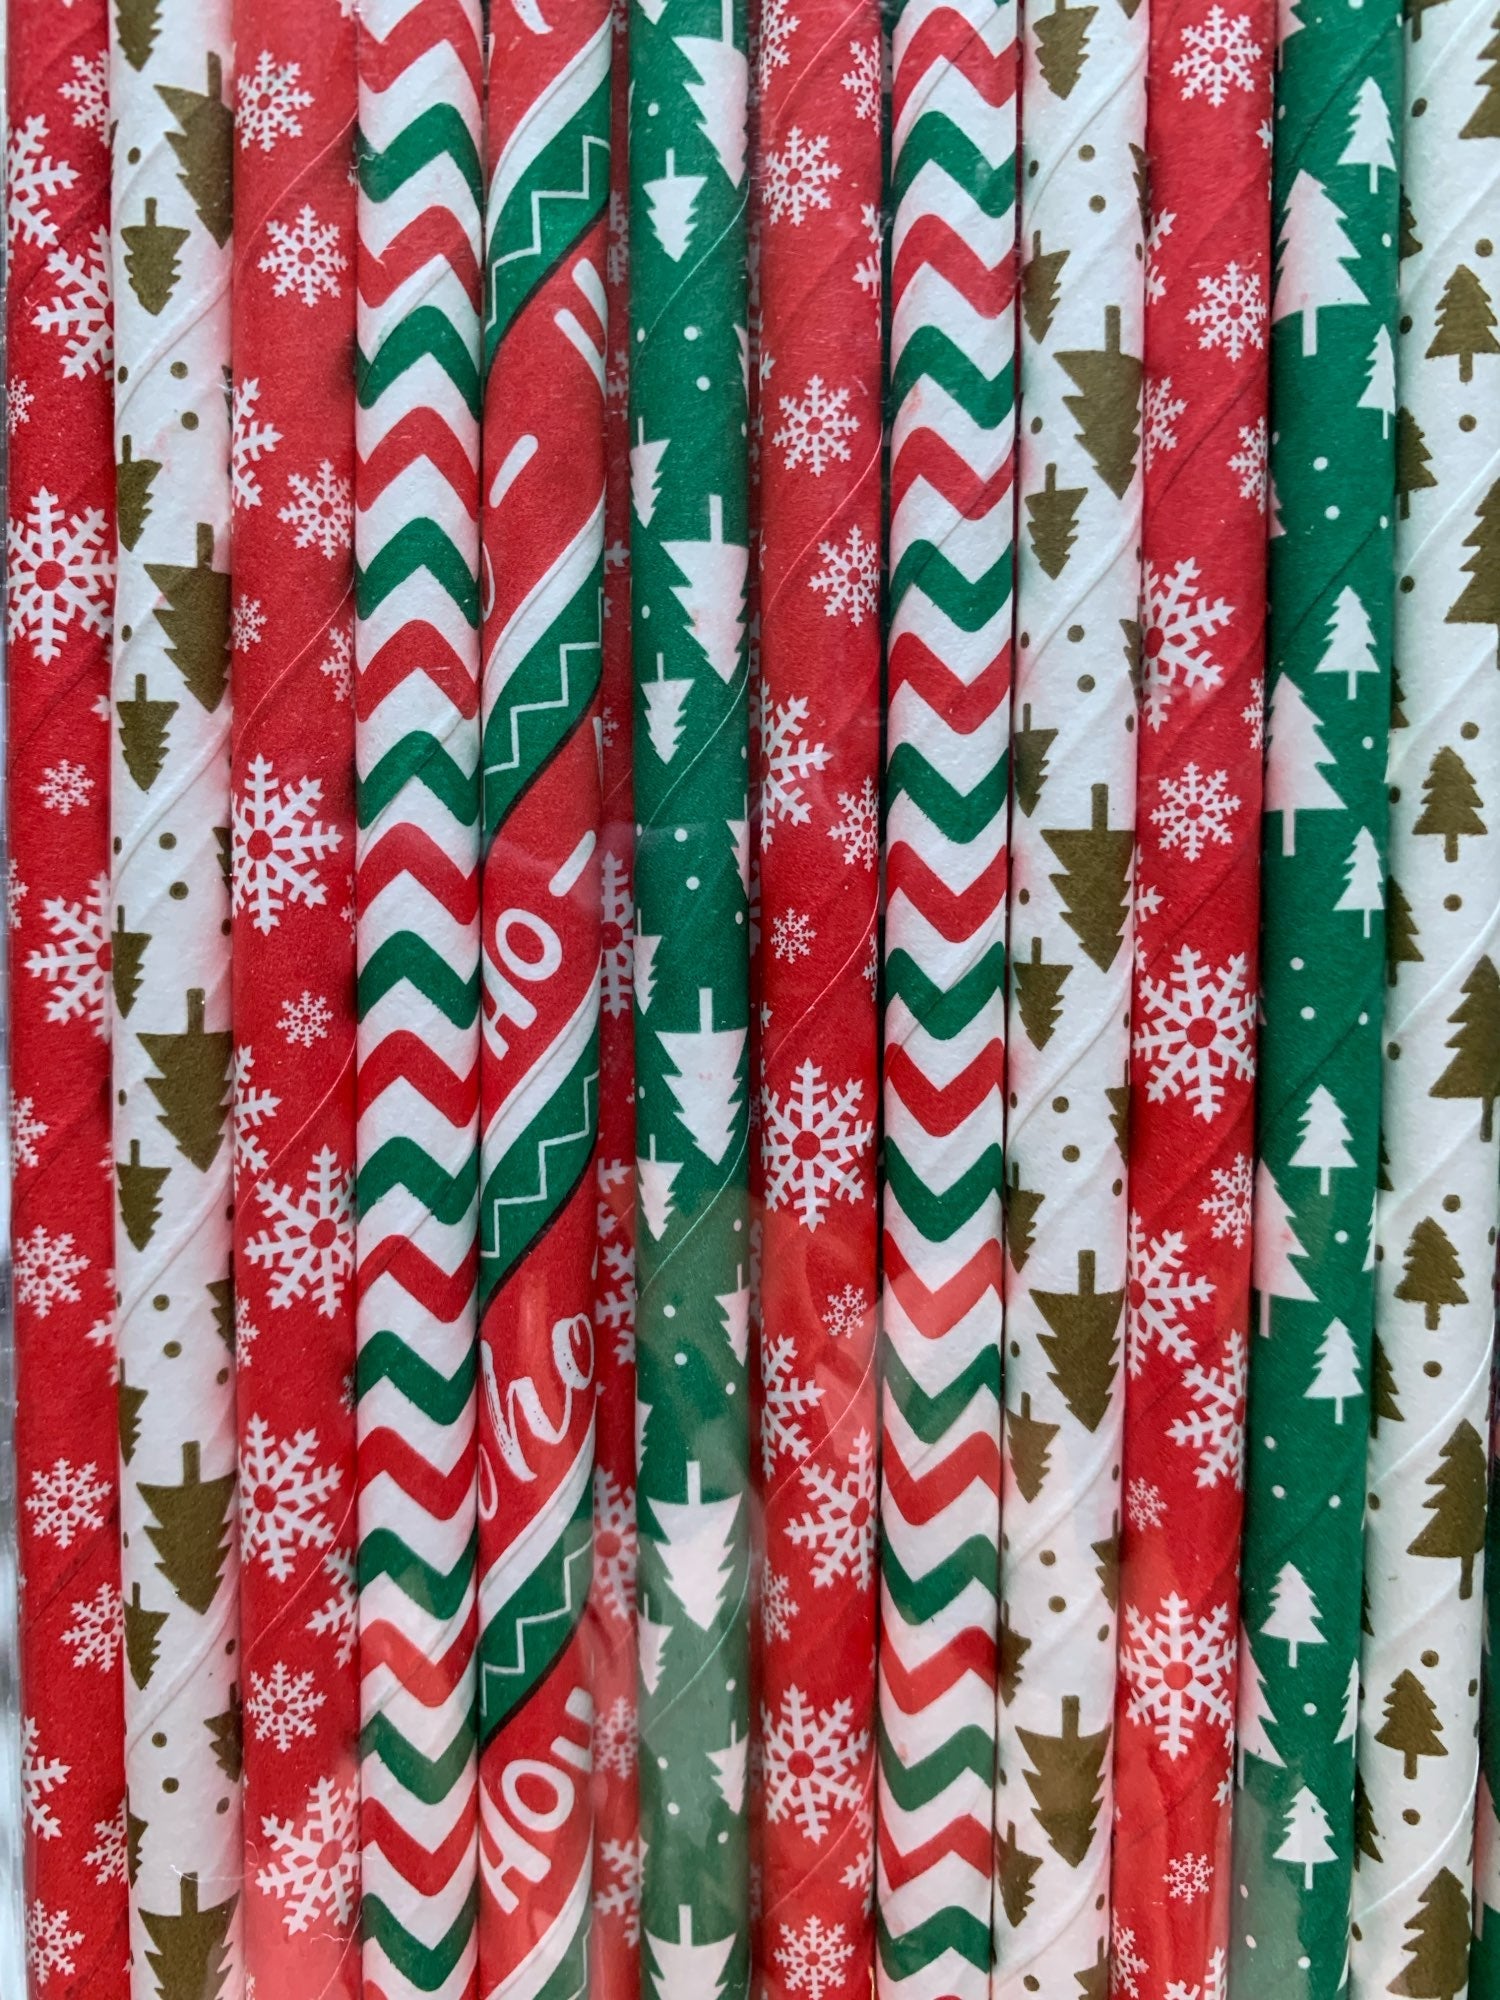 Liphontcta Pack of 150 Christmas Paper Straws in Red, Green and Gold. Holiday Straws, Vintage Party Supplies, Santa Red & Emerald Elf Green Straws